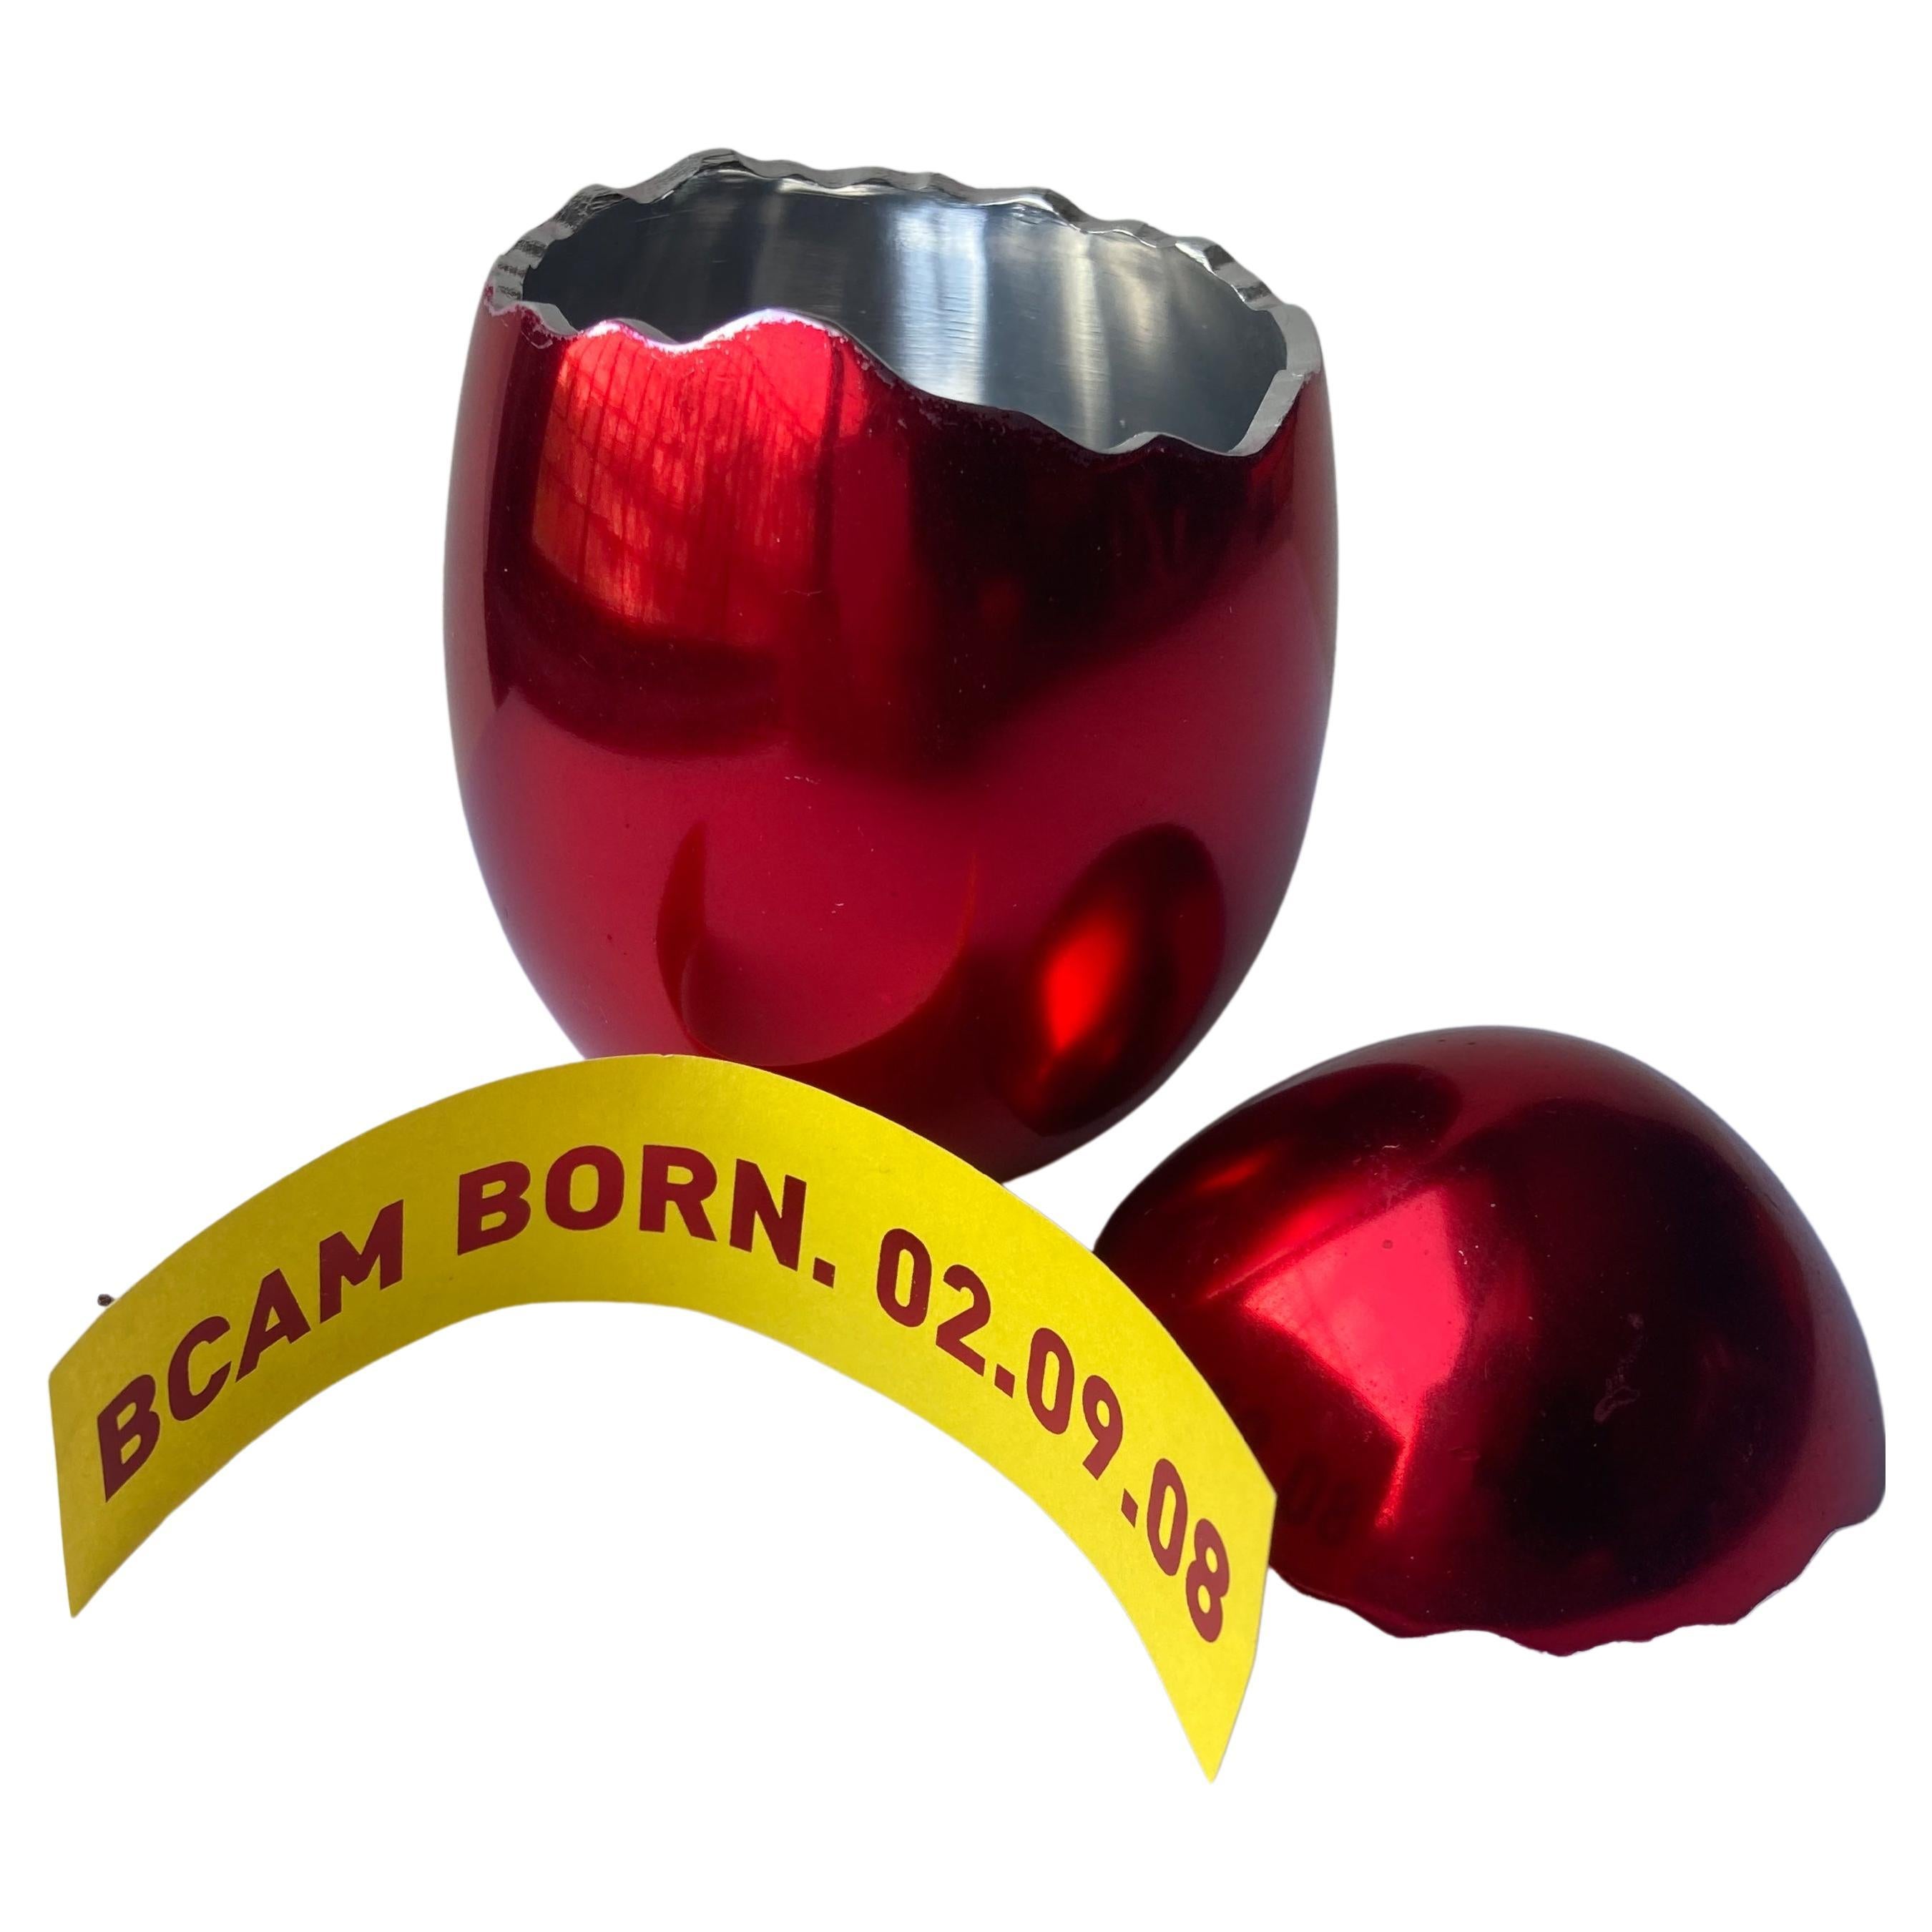 Jeff Koons "Cracked Egg Red"Aluminum/Sculpture/Box,with Yellow,Birth Certificate